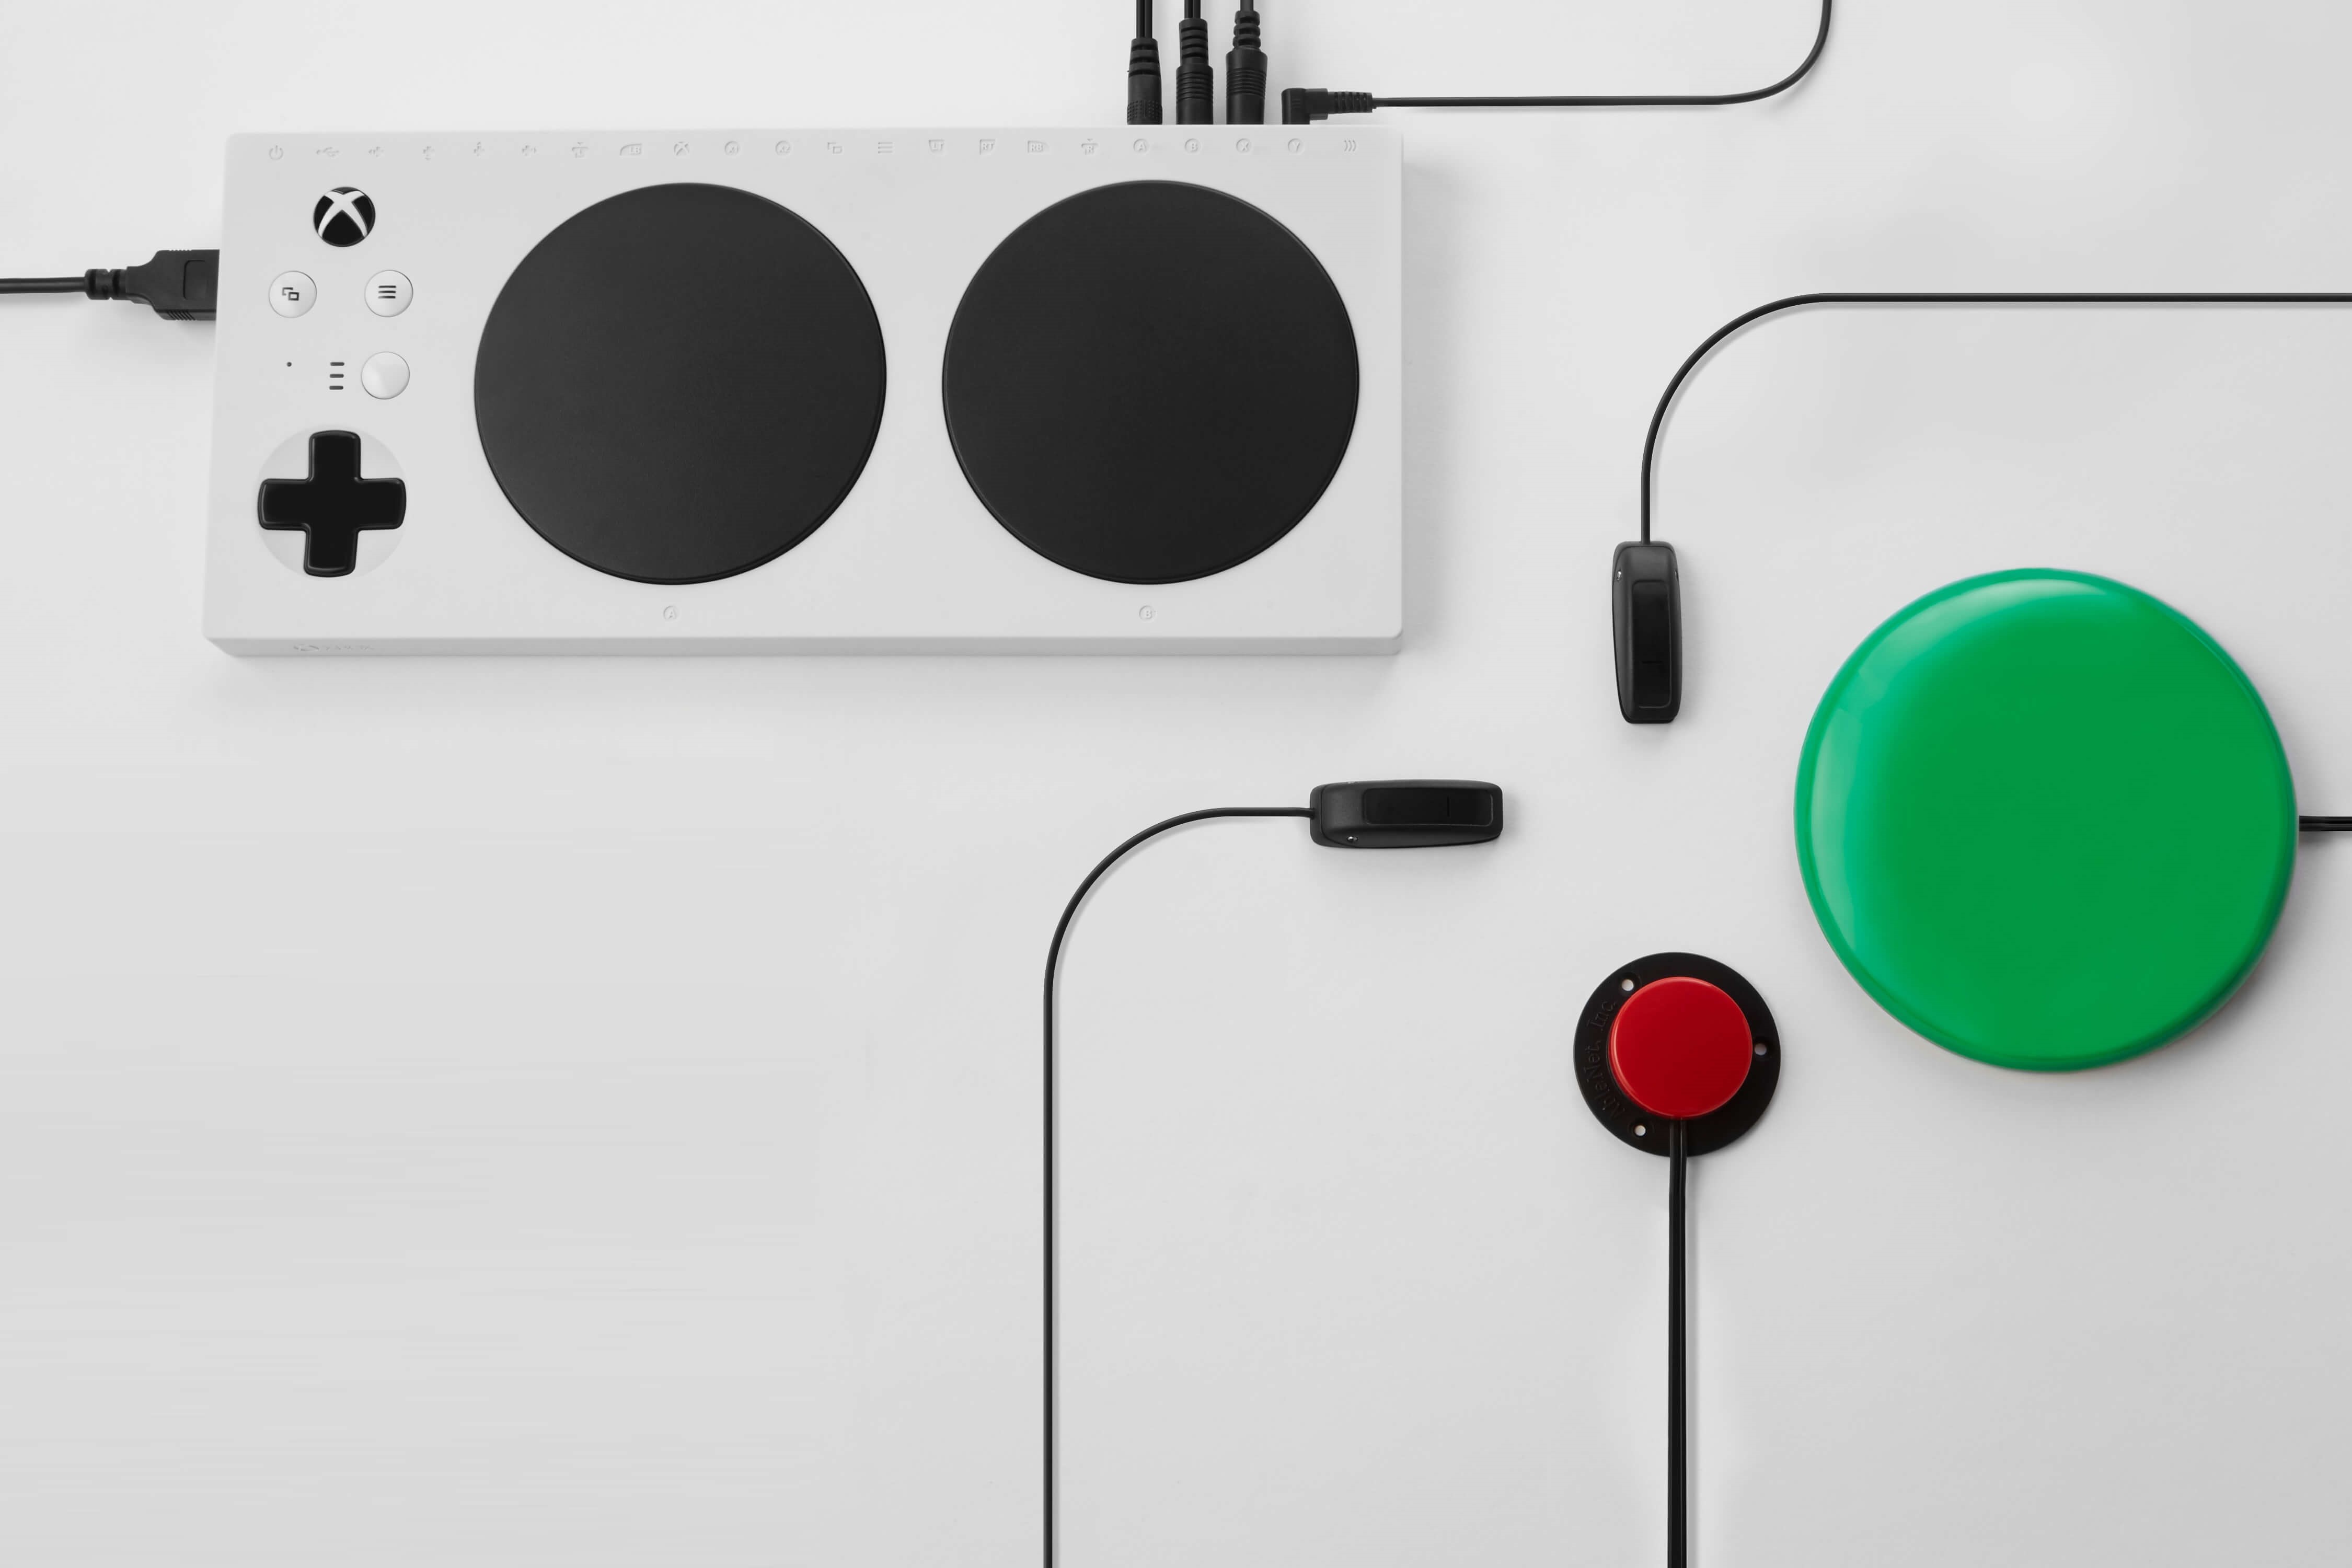 Xbox Adaptive Controller - Xbox Adaptive Controller Accessories , HD Wallpaper & Backgrounds